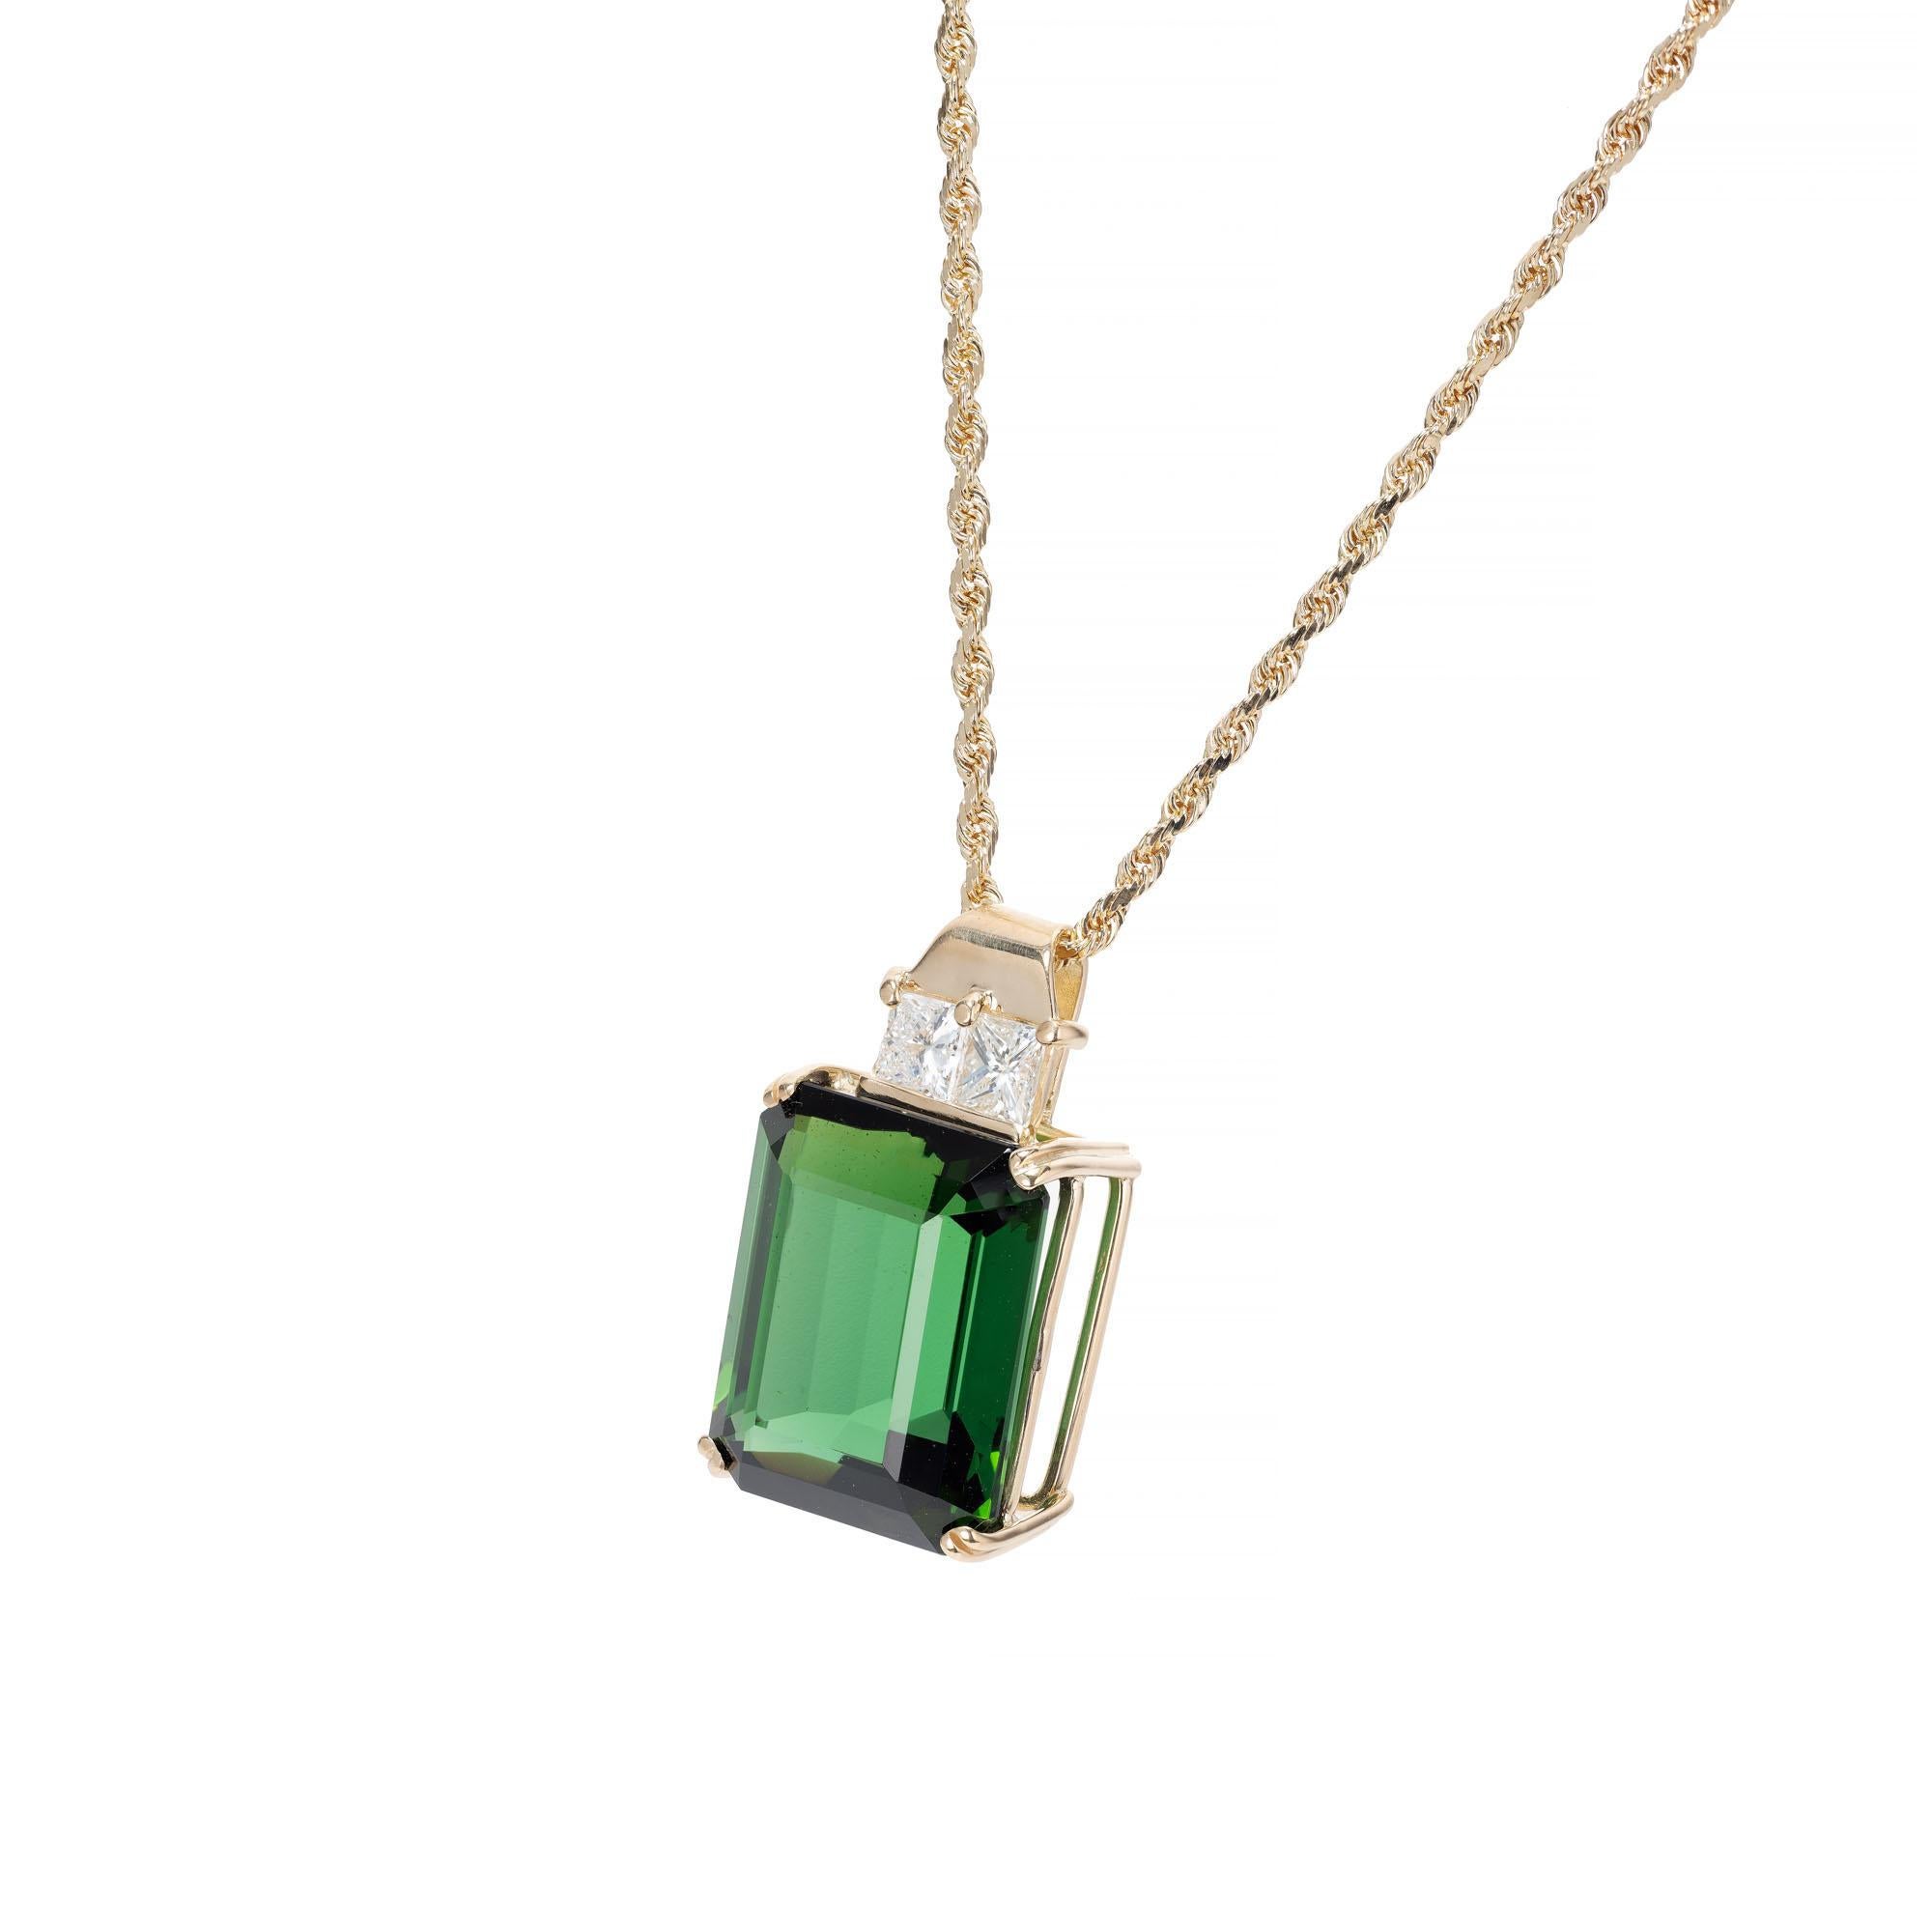 Bright green 14.03 carat emerald cut tourmaline and princess cut diamond pendant on an 18k yellow gold chain. Mad in the Peter Suchy Workshop

1 octagonal cut green tourmaline VS-SI, approx. 14.03cts 
2 princess cut diamonds I-J VS, approx.